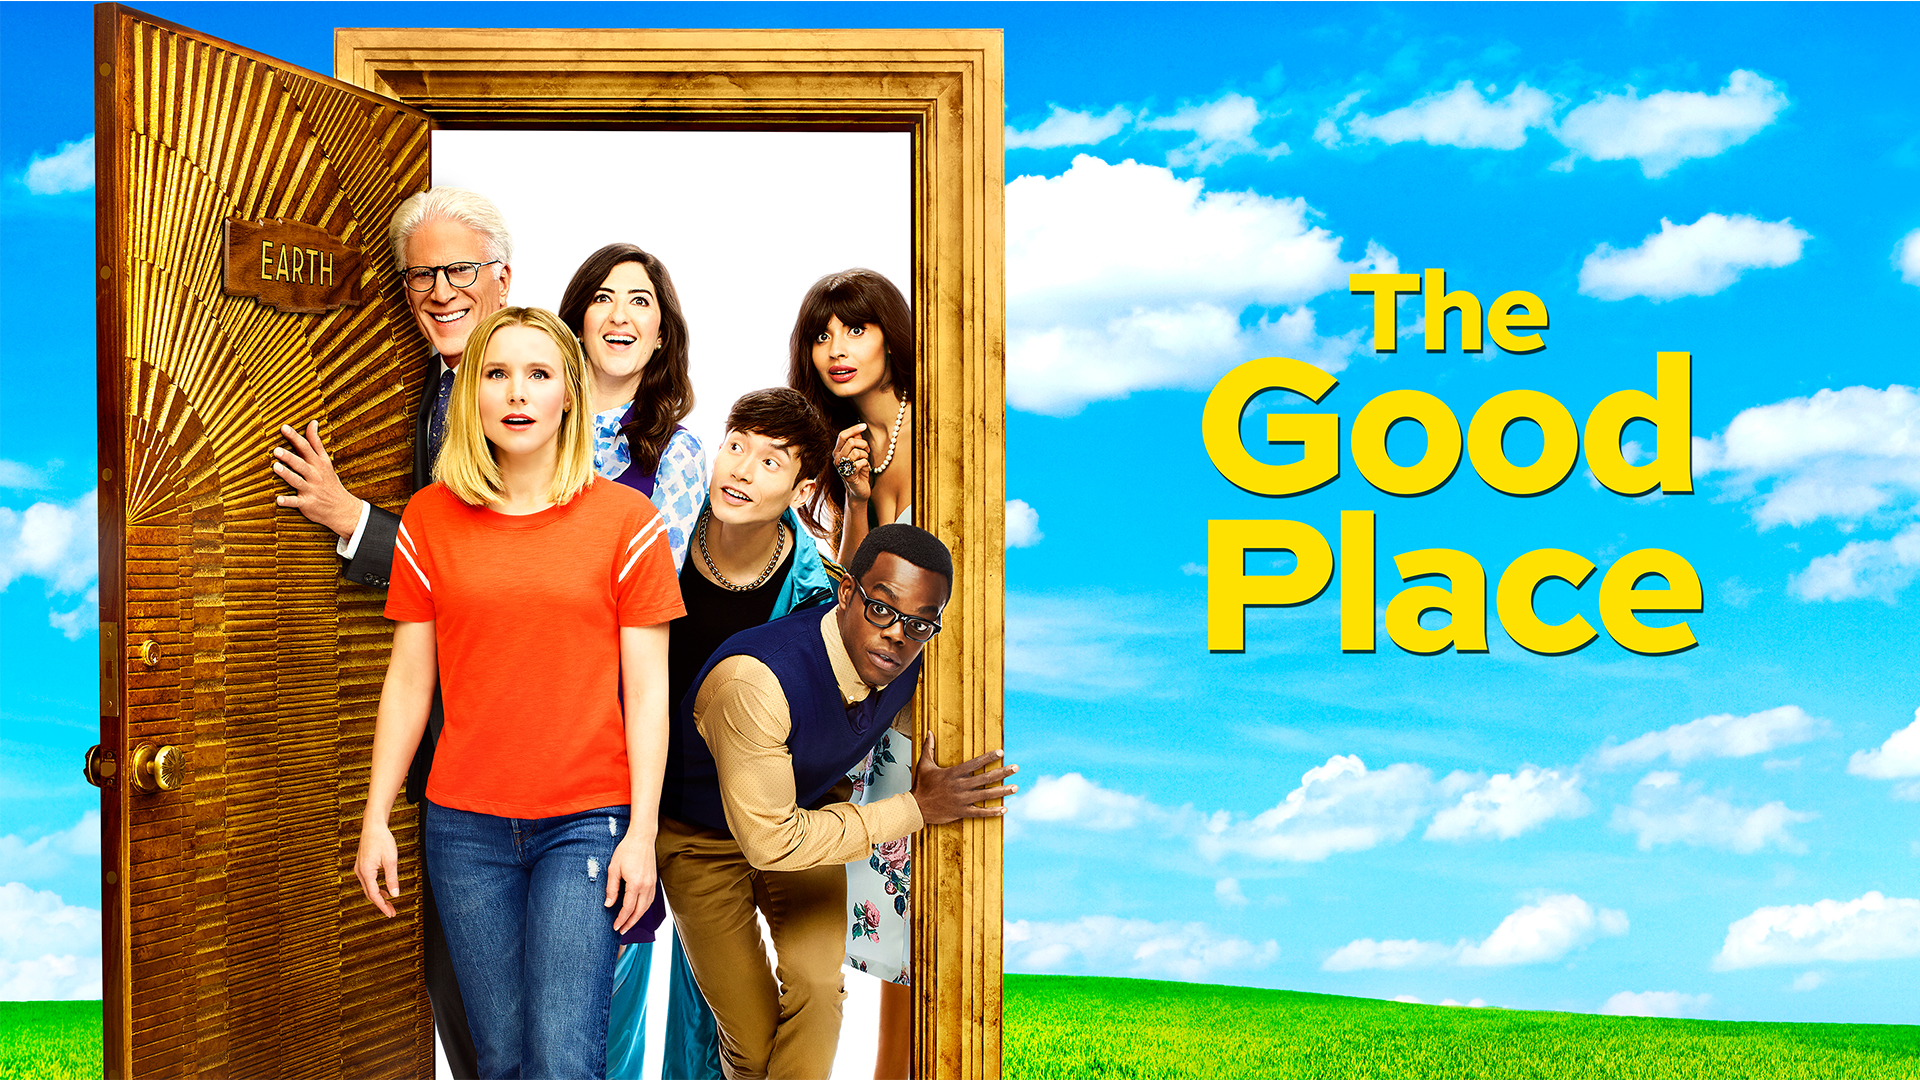 SDCC 2019: The Good Place Press Room